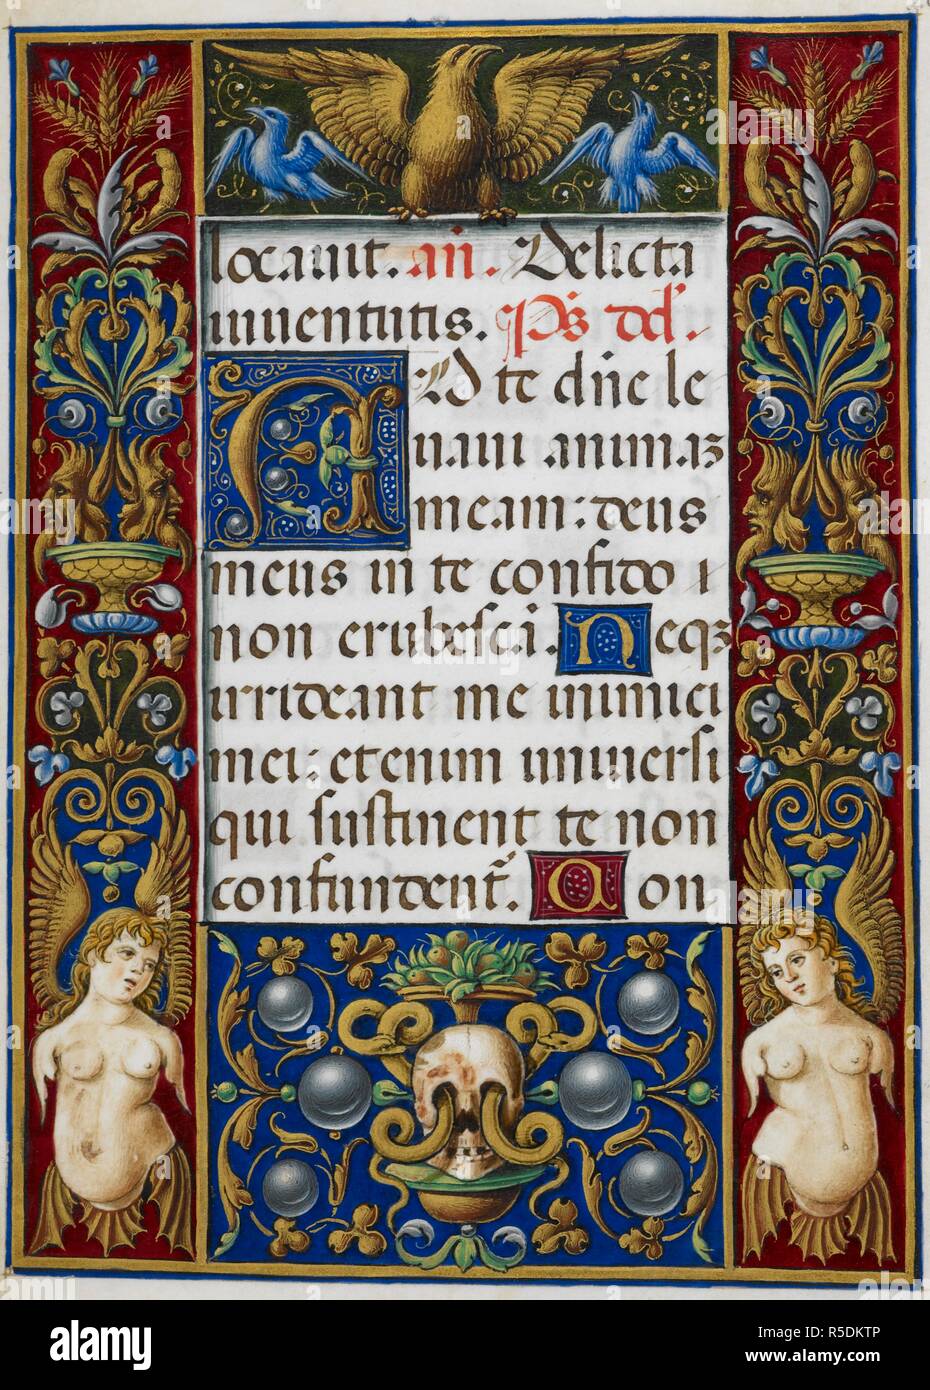 Text page from Office of the Dead with decorated border showing a skull with serpents entwined. Sforza Hours. Milan, circa 1490; Flemish insertions, 1517-1520. Source: Add. 34294, f.290. Language: Latin. Author: Birago, Giovan Pietro. Stock Photo